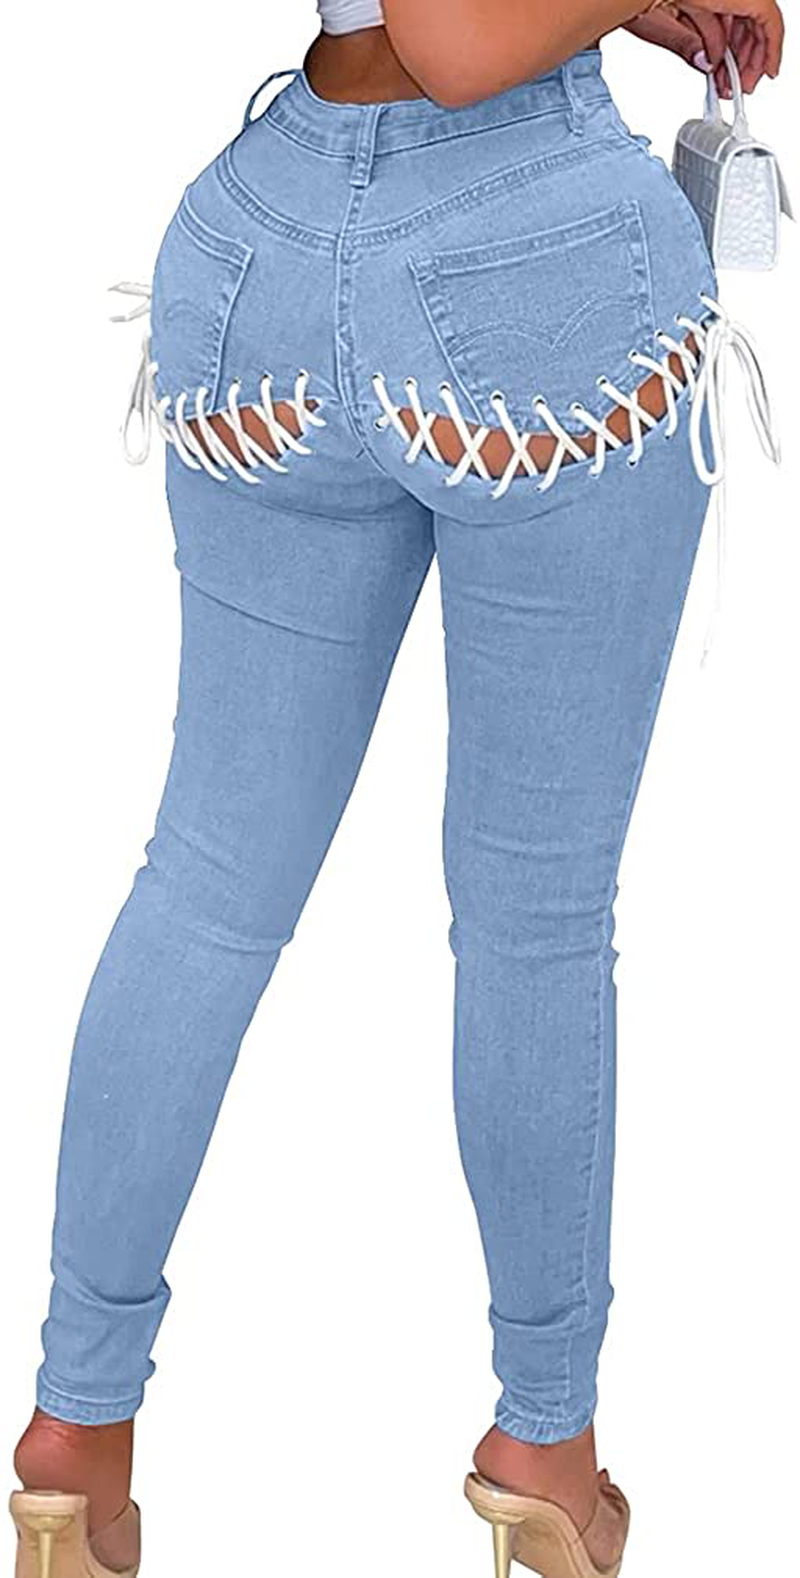 XXTAXN Women's Elastic High Waisted Skinny Ripped Lace Up Adjustable Jeans with Pockets